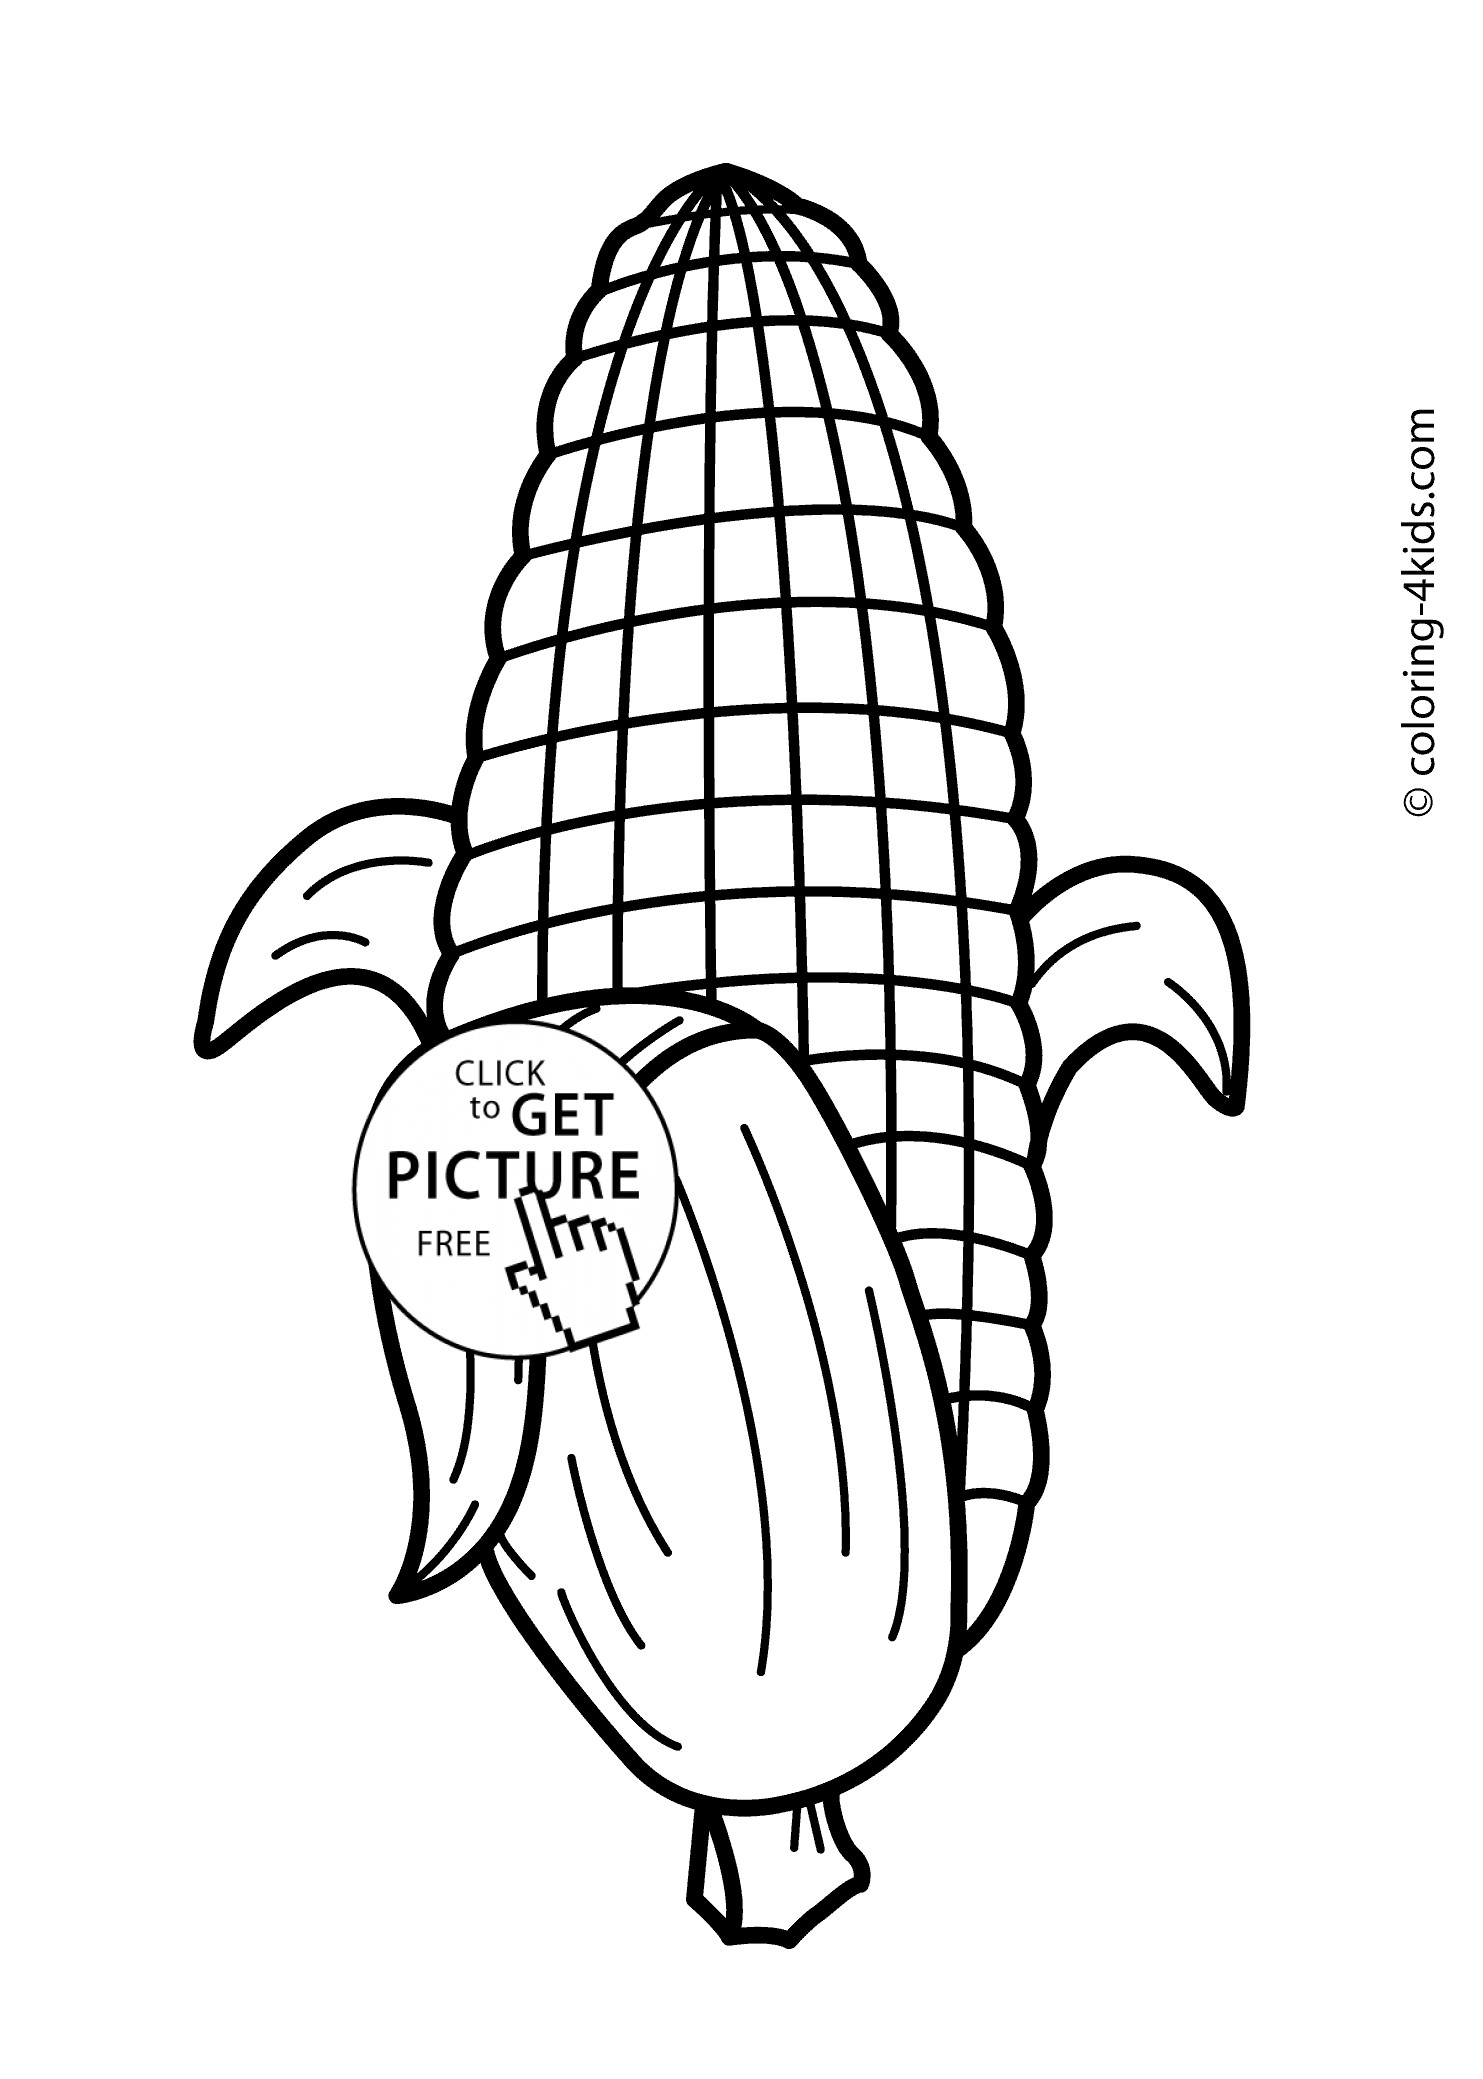 Vegetable Coloring Book Kids
 Maize ve able coloring page for kids printable